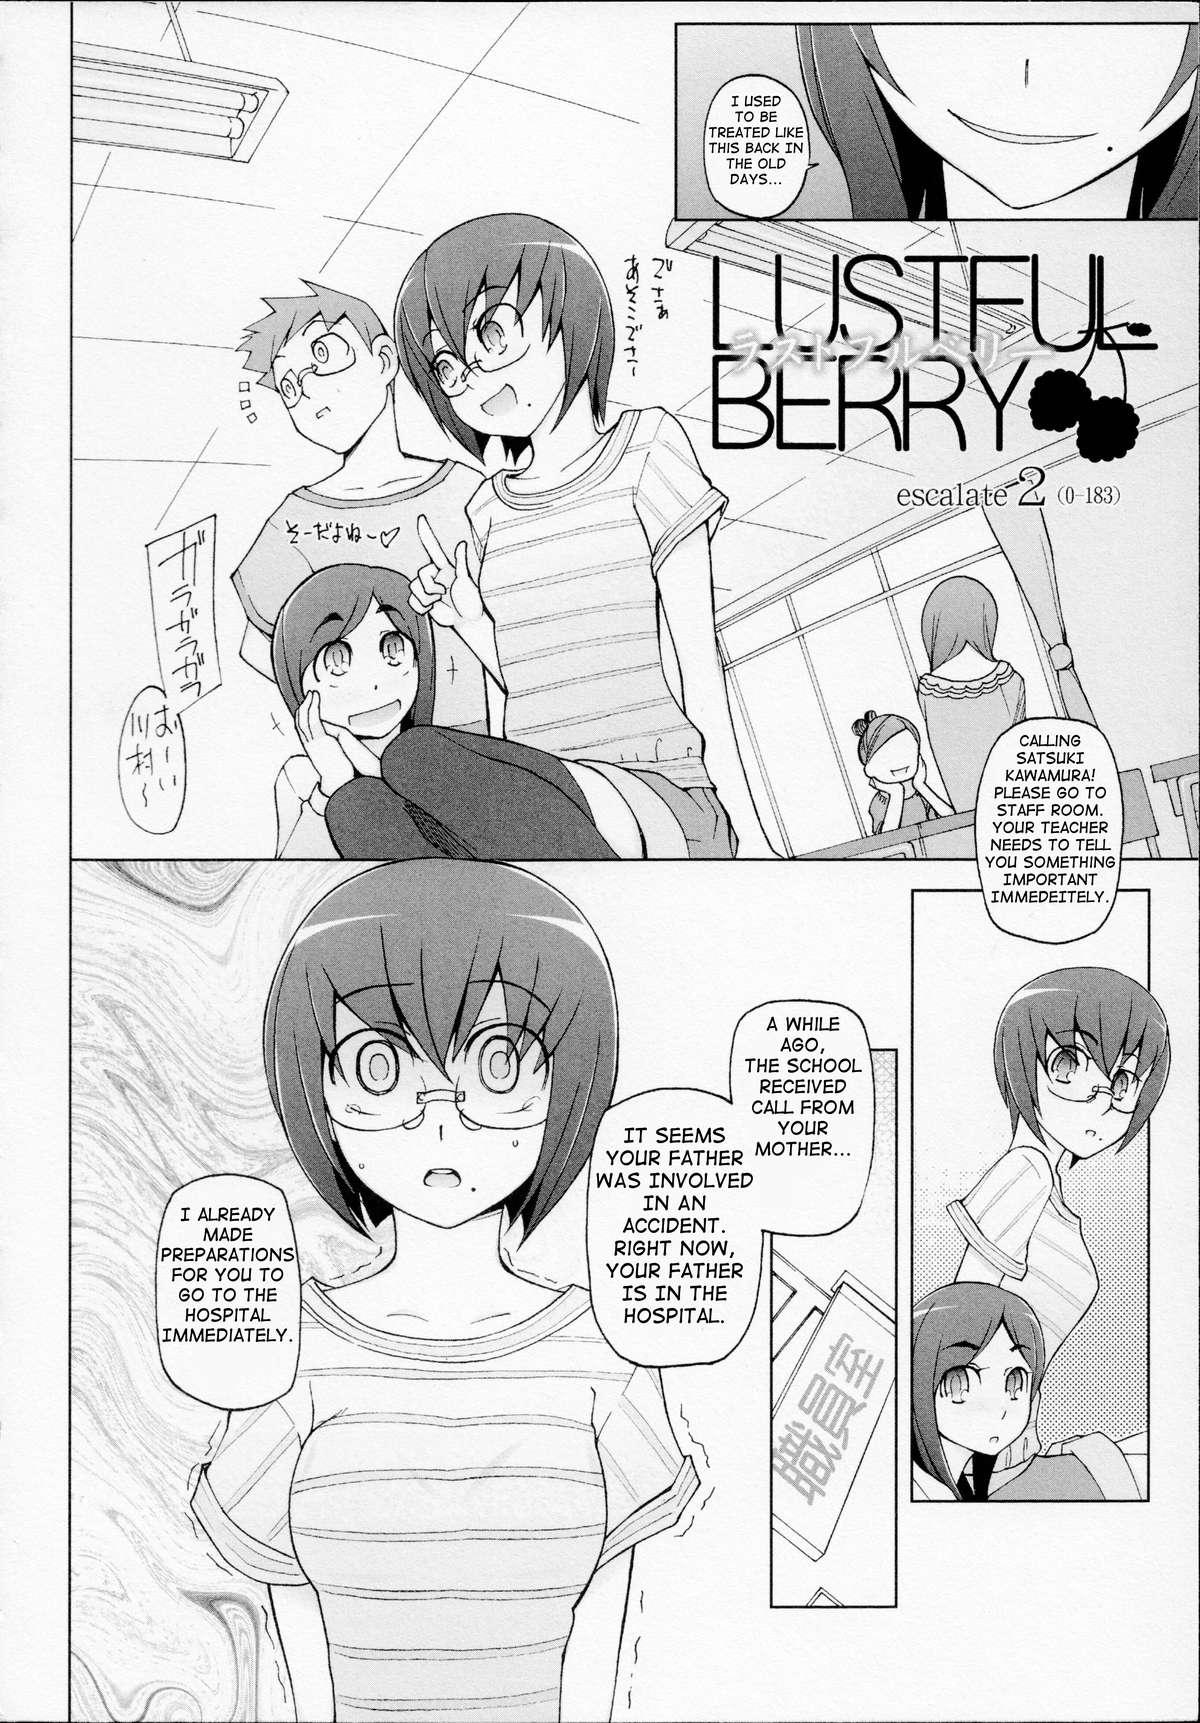 LUSTFUL BERRY Chapter 1-3 39